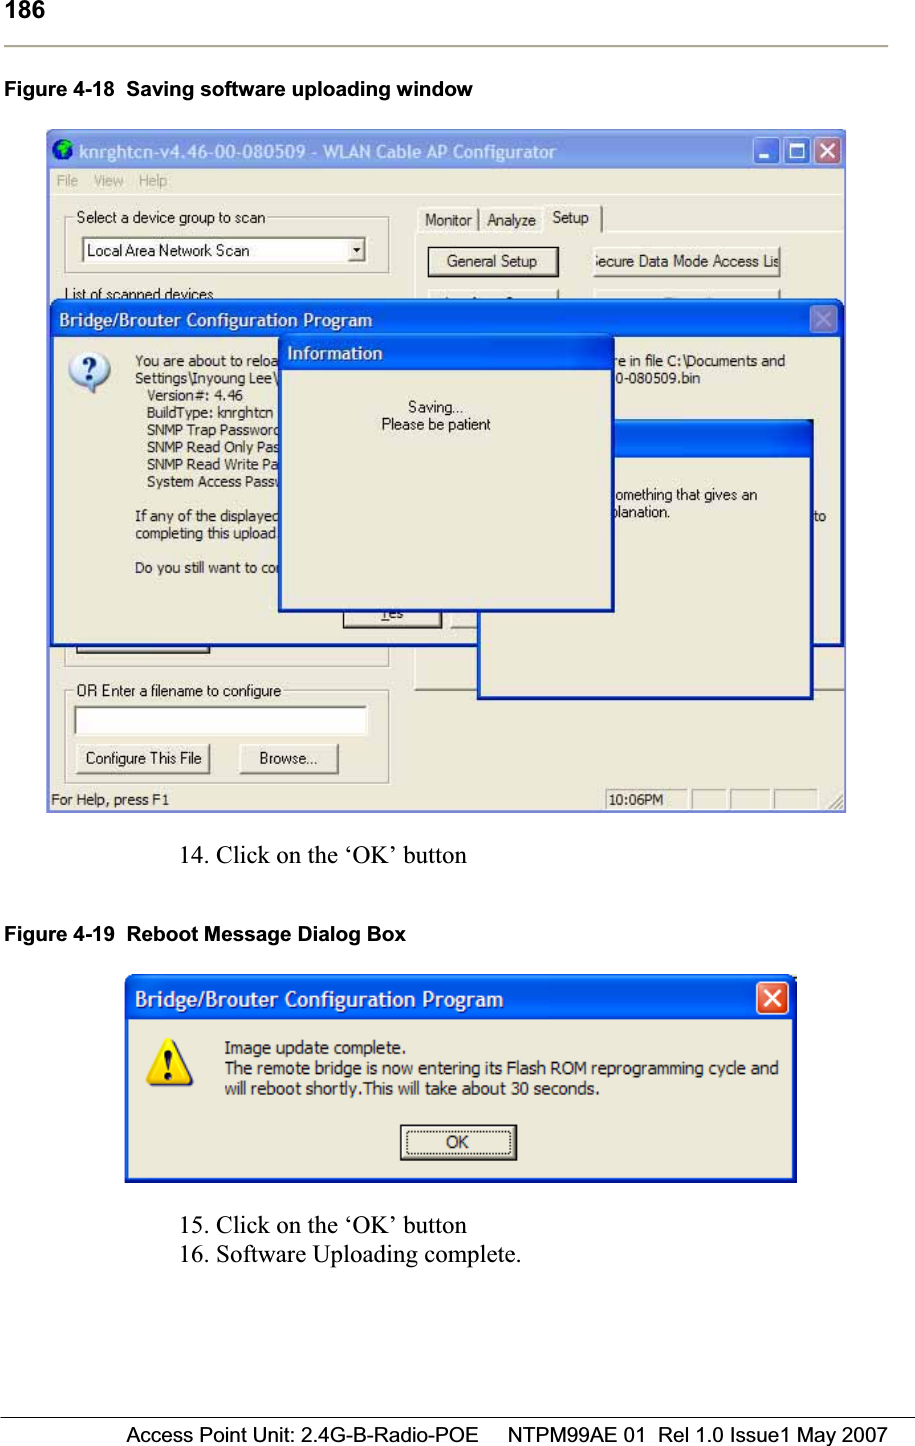 186 Access Point Unit: 2.4G-B-Radio-POE     NTPM99AE 01  Rel 1.0 Issue1 May 2007Figure 4-18  Saving software uploading window 14. Click on the ‘OK’ button Figure 4-19  Reboot Message Dialog Box 15. Click on the ‘OK’ button 16. Software Uploading complete. 